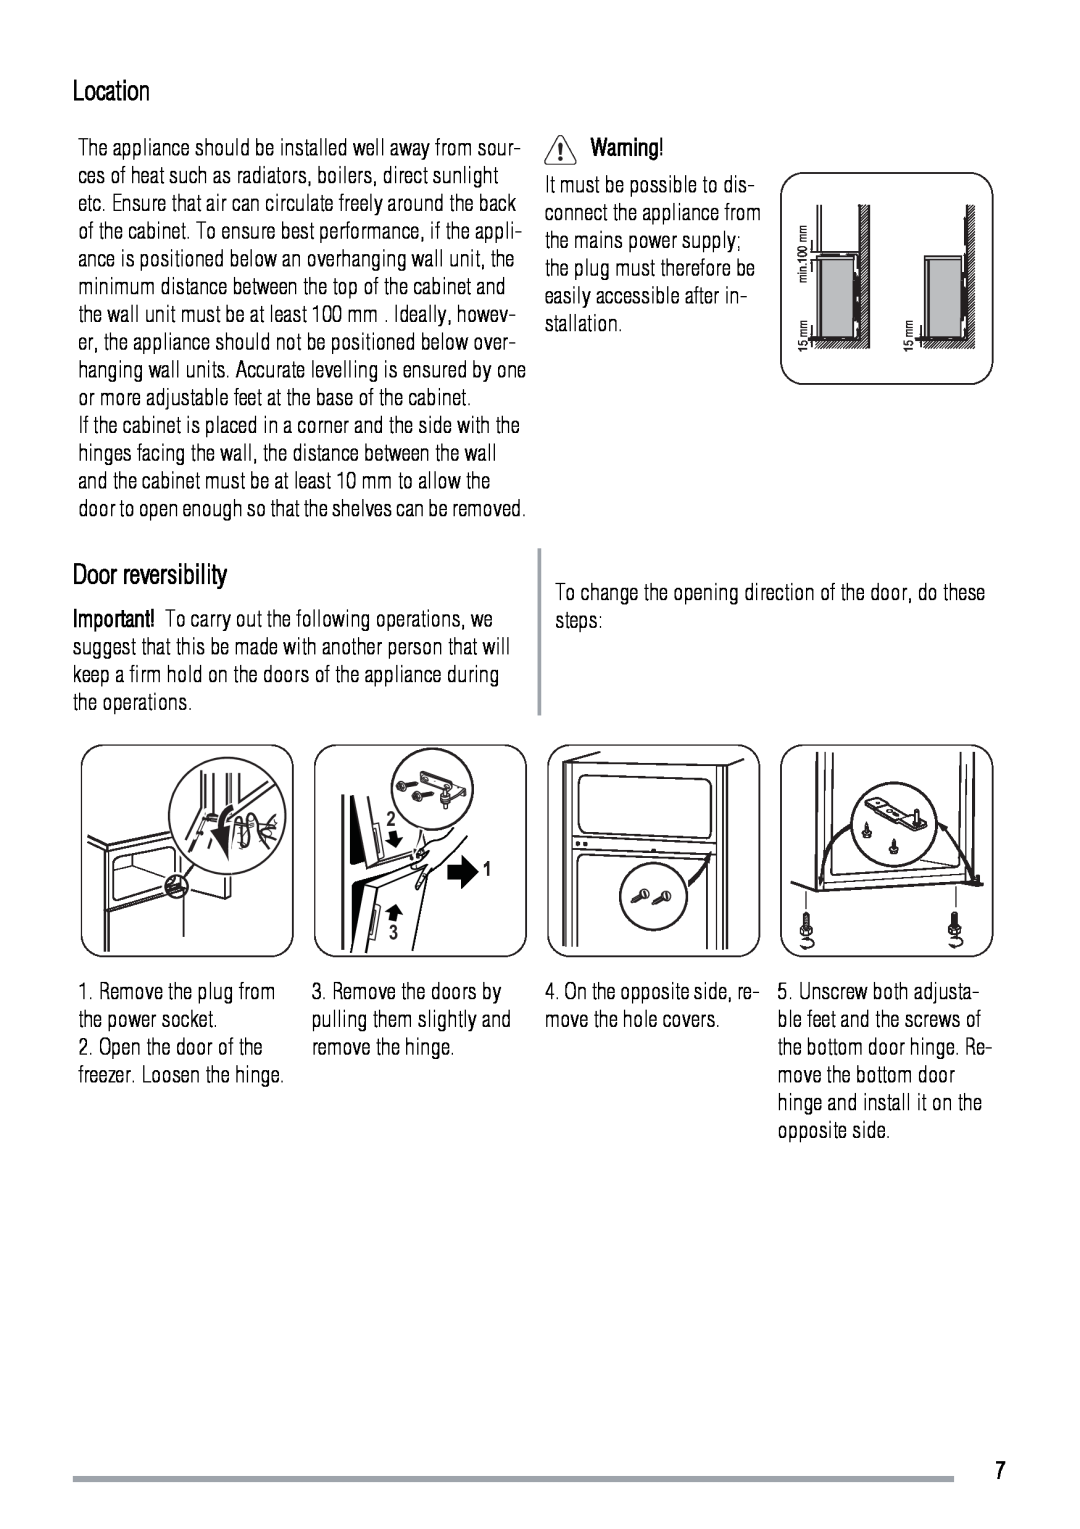 Zanussi ZRT318W user manual Location, Door reversibility, To change the opening direction of the door, do these steps 